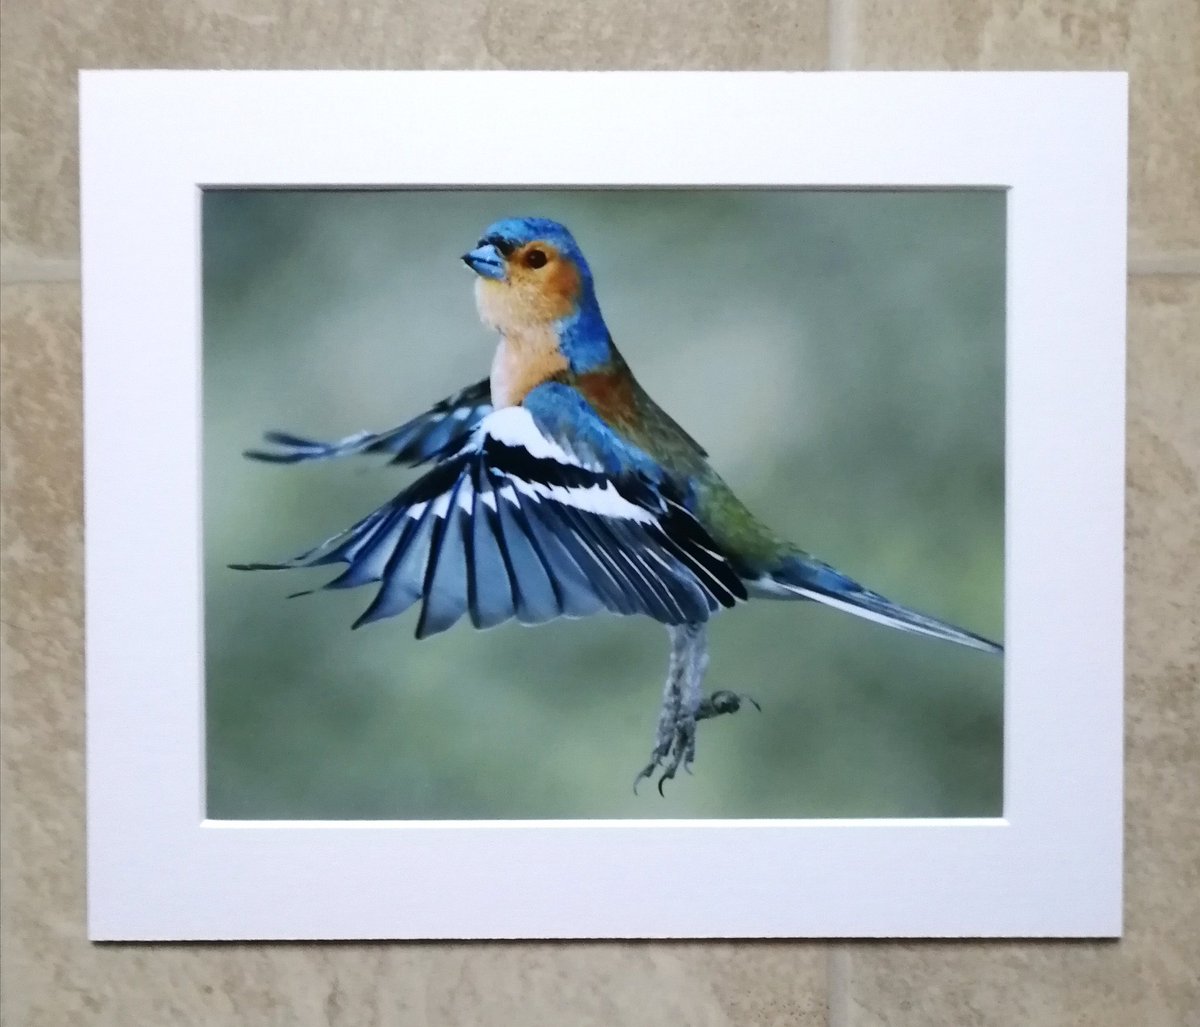 'Chaffinch lift-off' - 10x8 mounted print.  You can buy it here; https://www.carlbovis.com/product-page/chaffinch-lift-off-10x8-mounted-print 